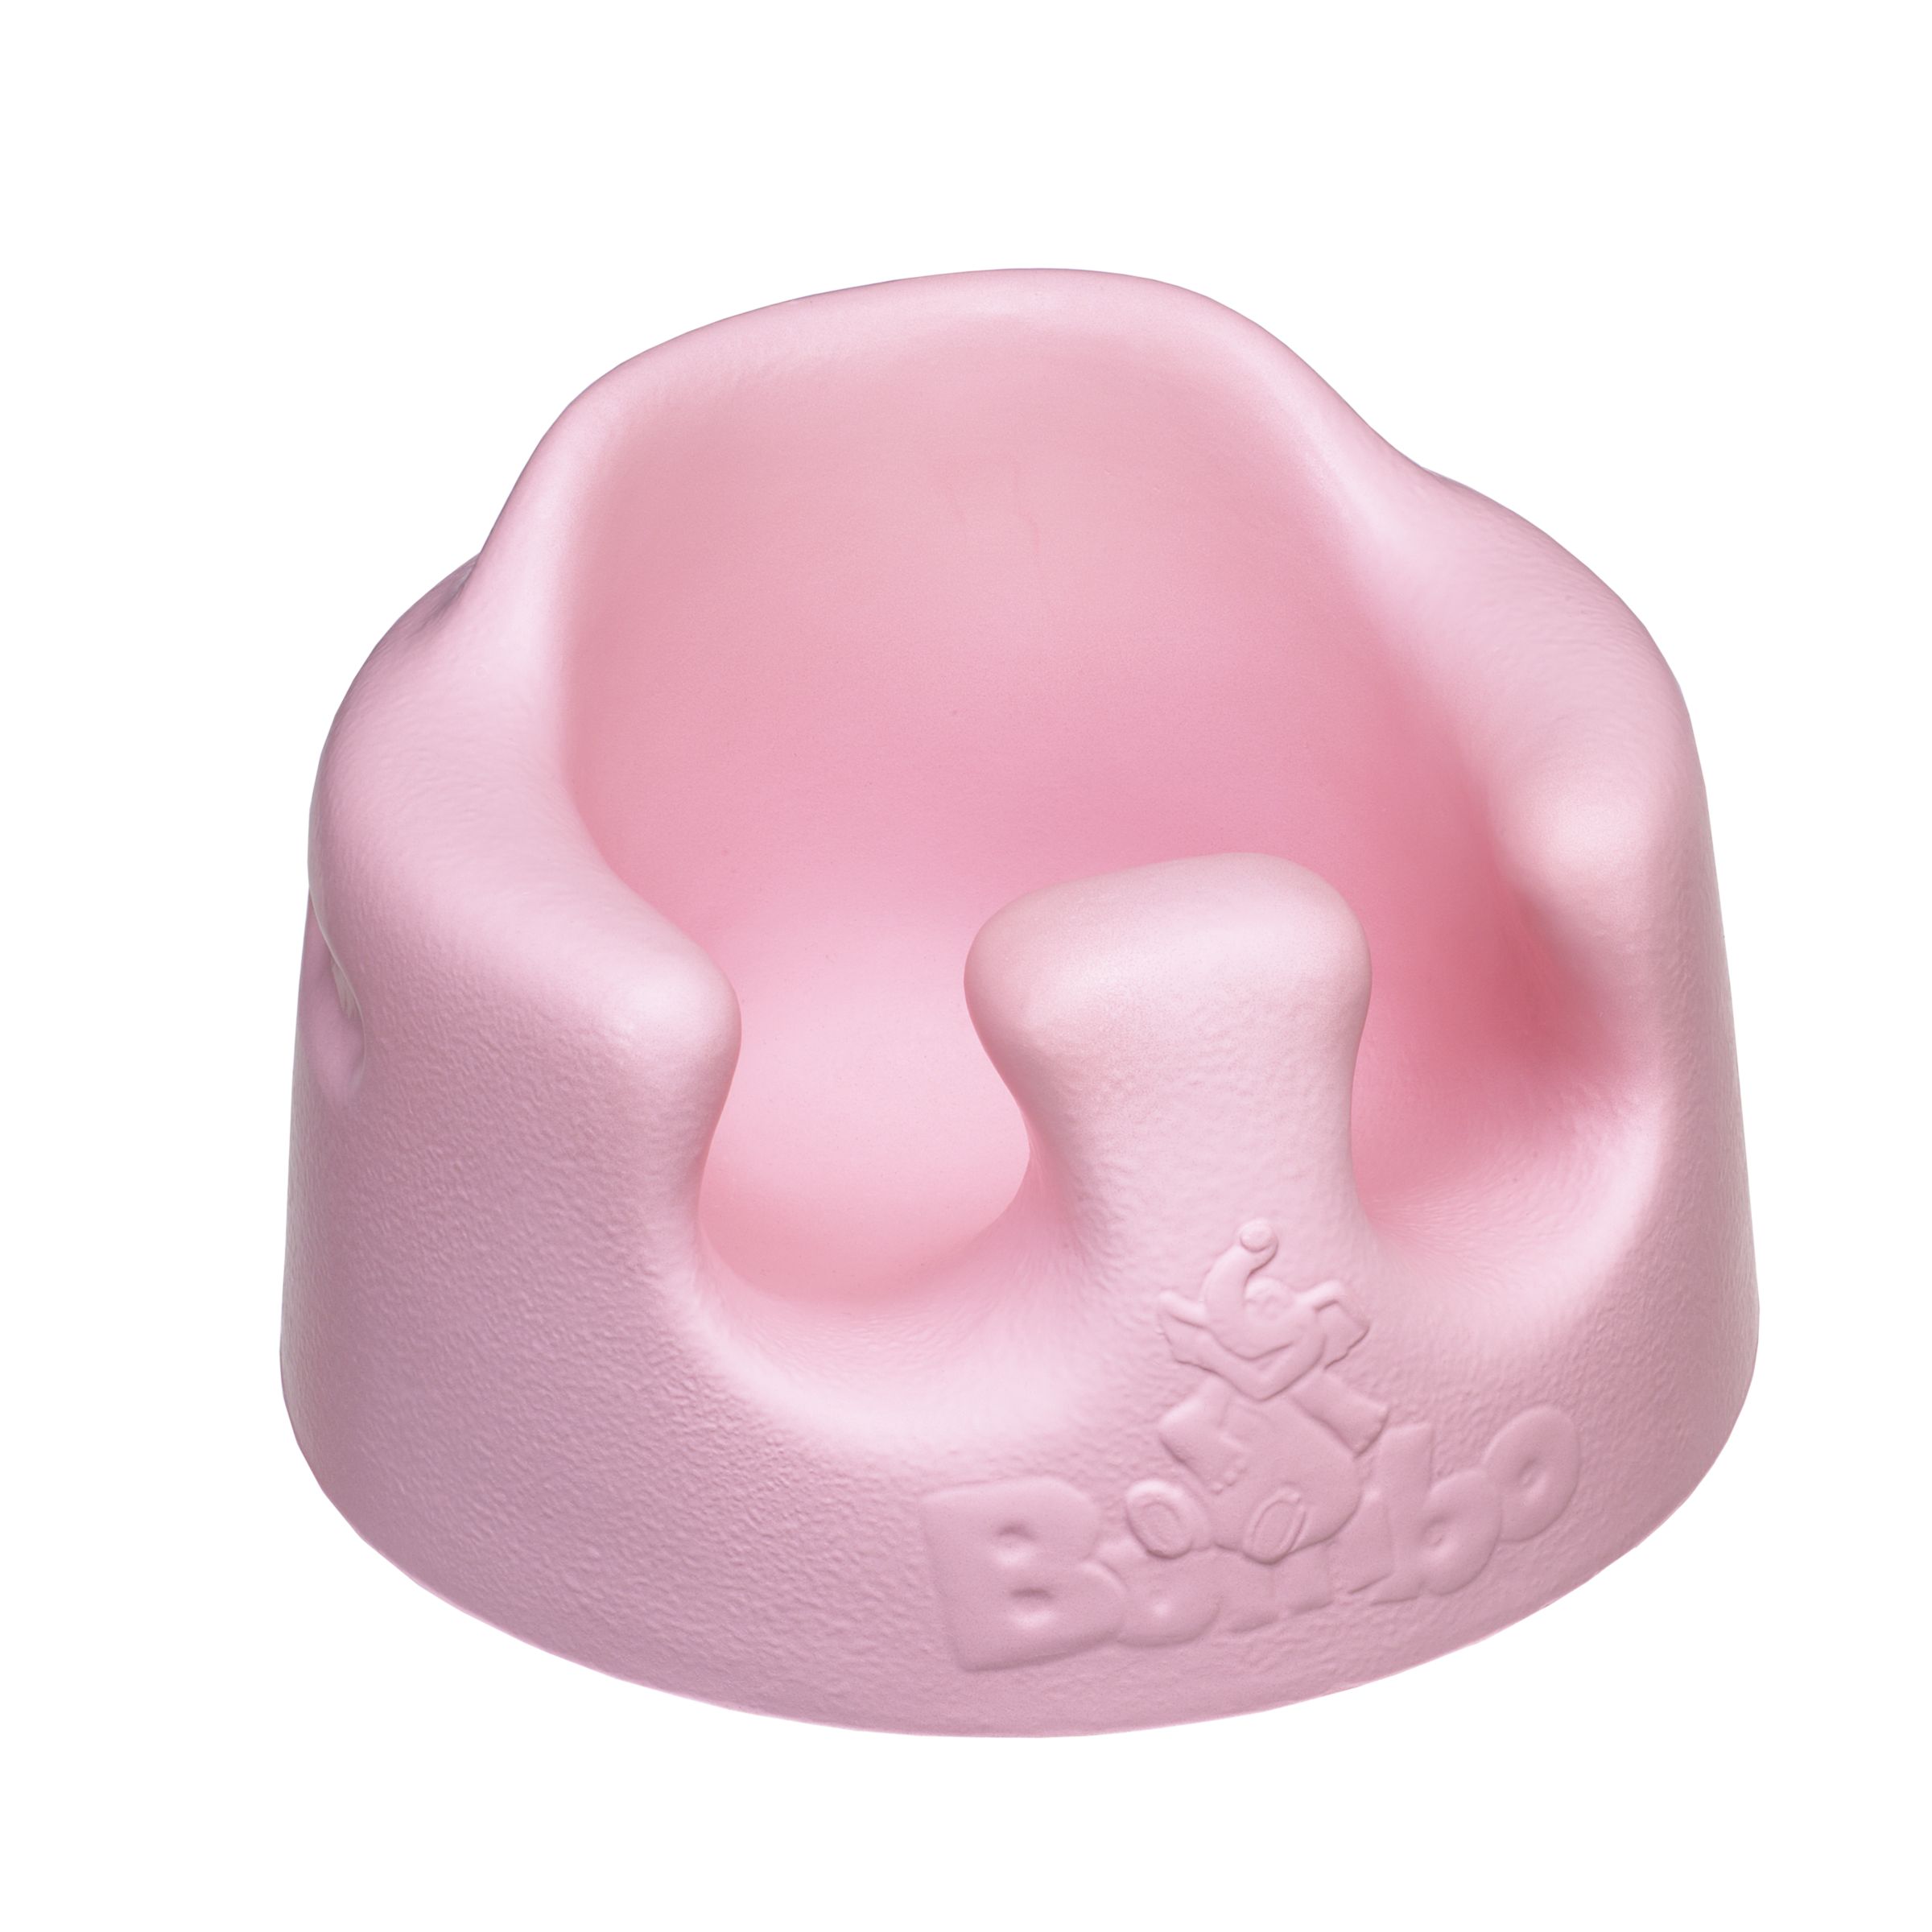 Gro-Group Bumbo Baby Sitter Seat, Pink